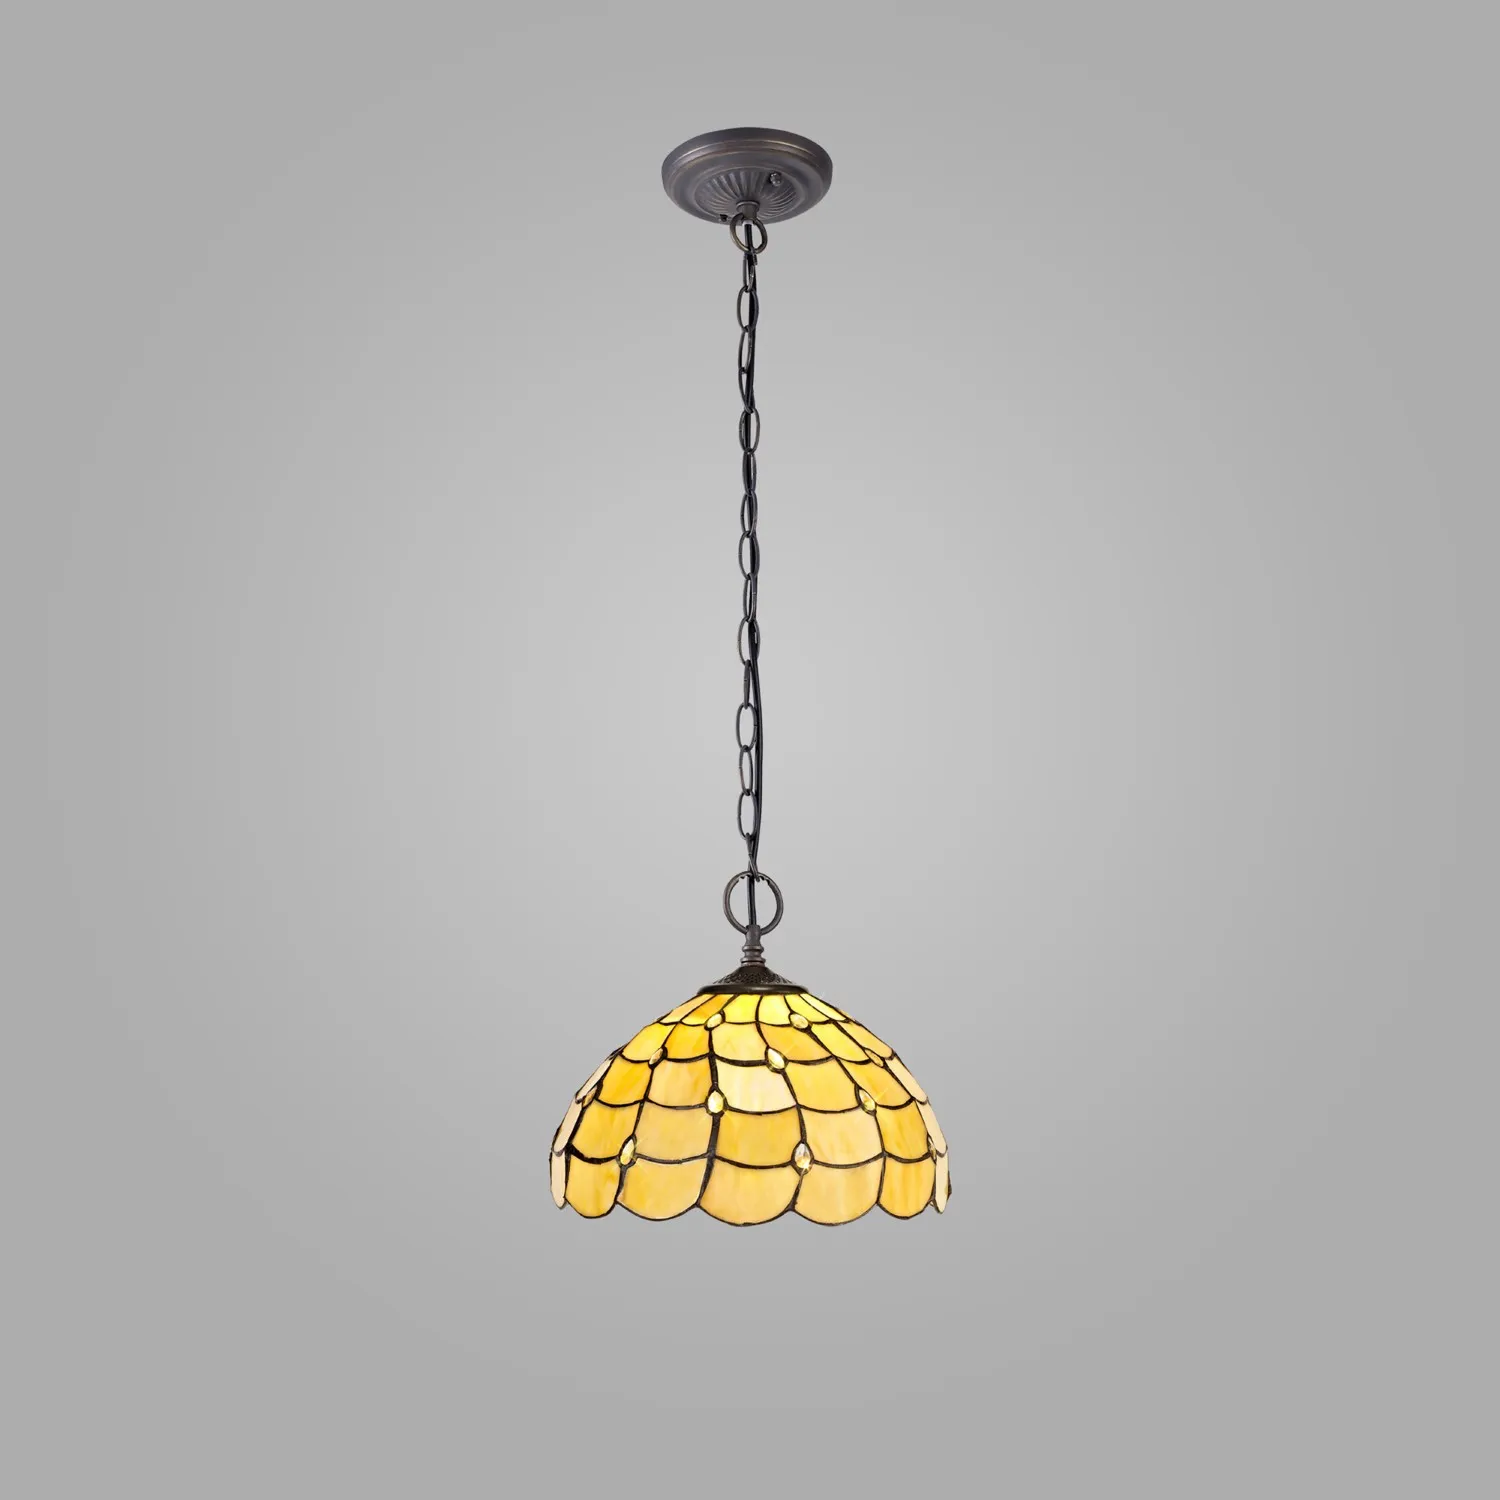 Stratford 2 Light Downlighter Pendant E27 With 30cm Tiffany Shade, Beige Clear Crystal Aged Antique Brass